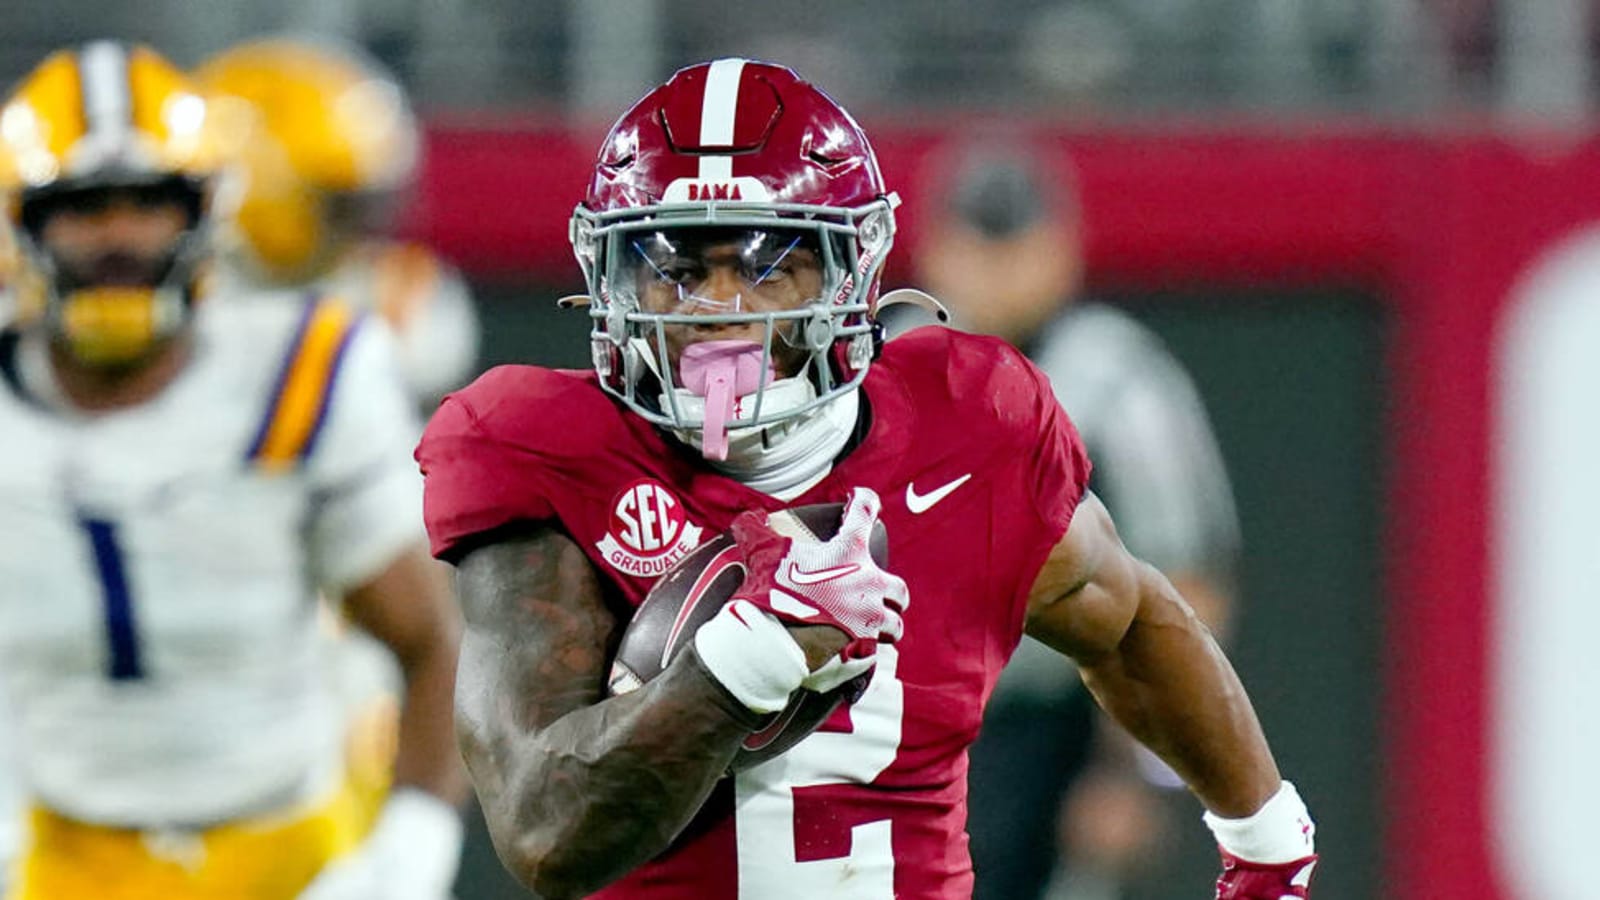 Report: Alabama's leading rusher to miss SEC title game